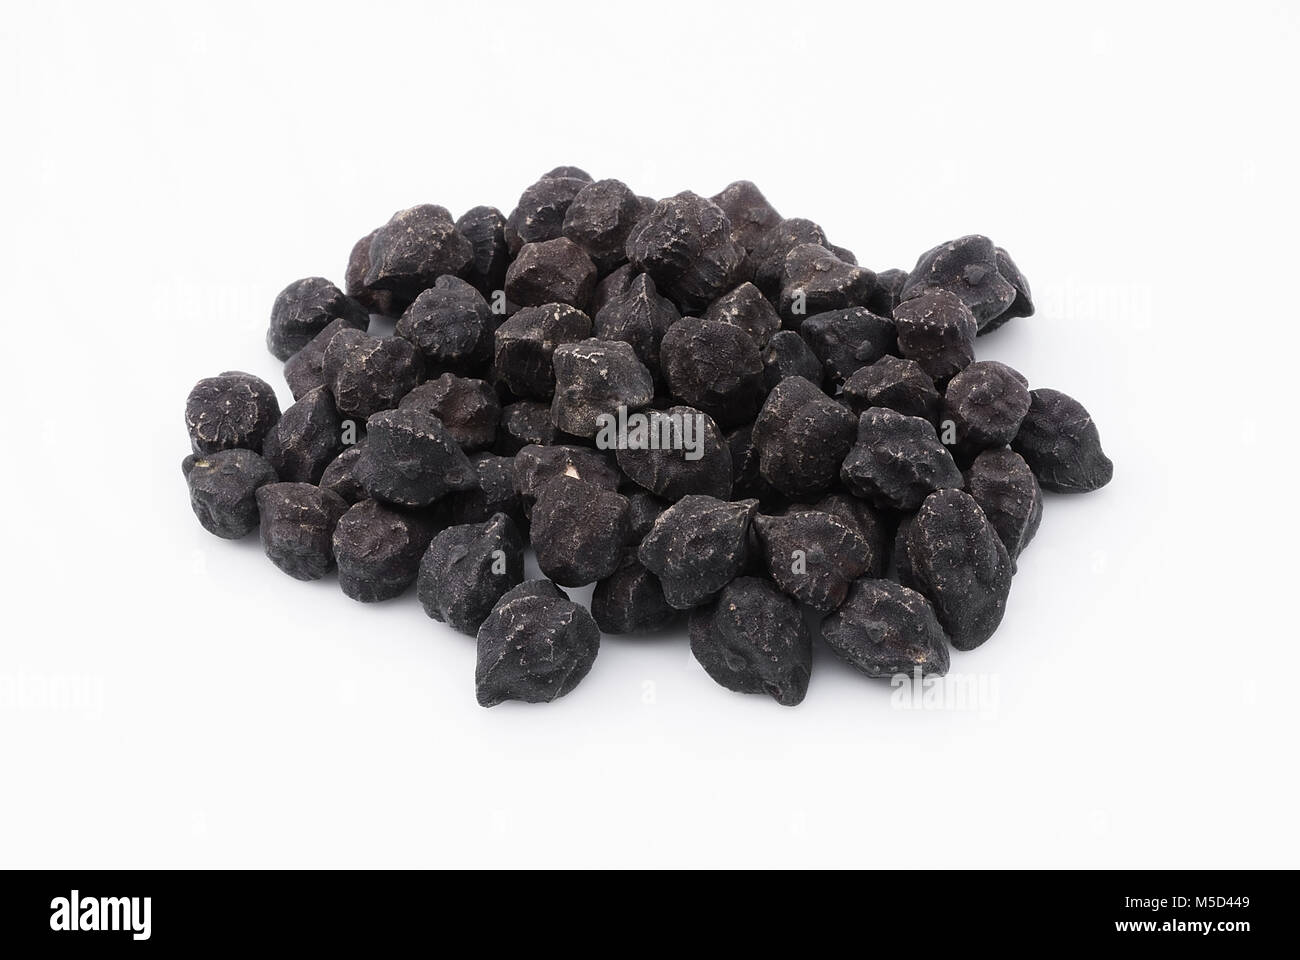 Black chickpea Murgia (cece nero), also known by the name of "cece del solco dritto" from the Puglia (Italy). subject isolated on white background Stock Photo